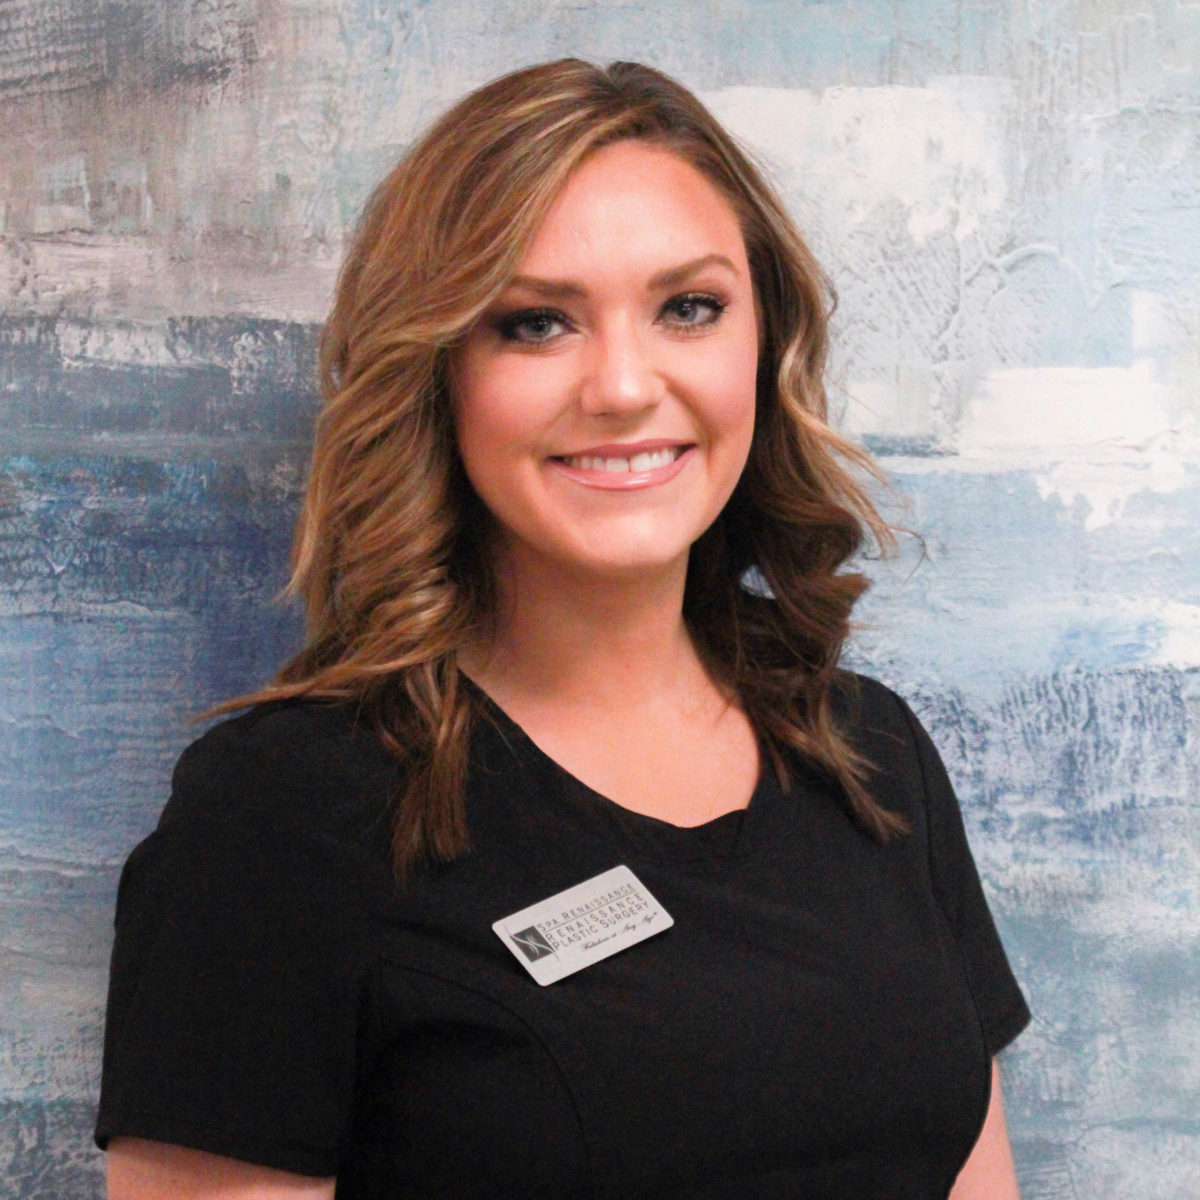 Amanda Doyle, BSN, Injection Specialist at Renaissance Plastic Surgery in Troy, MI.